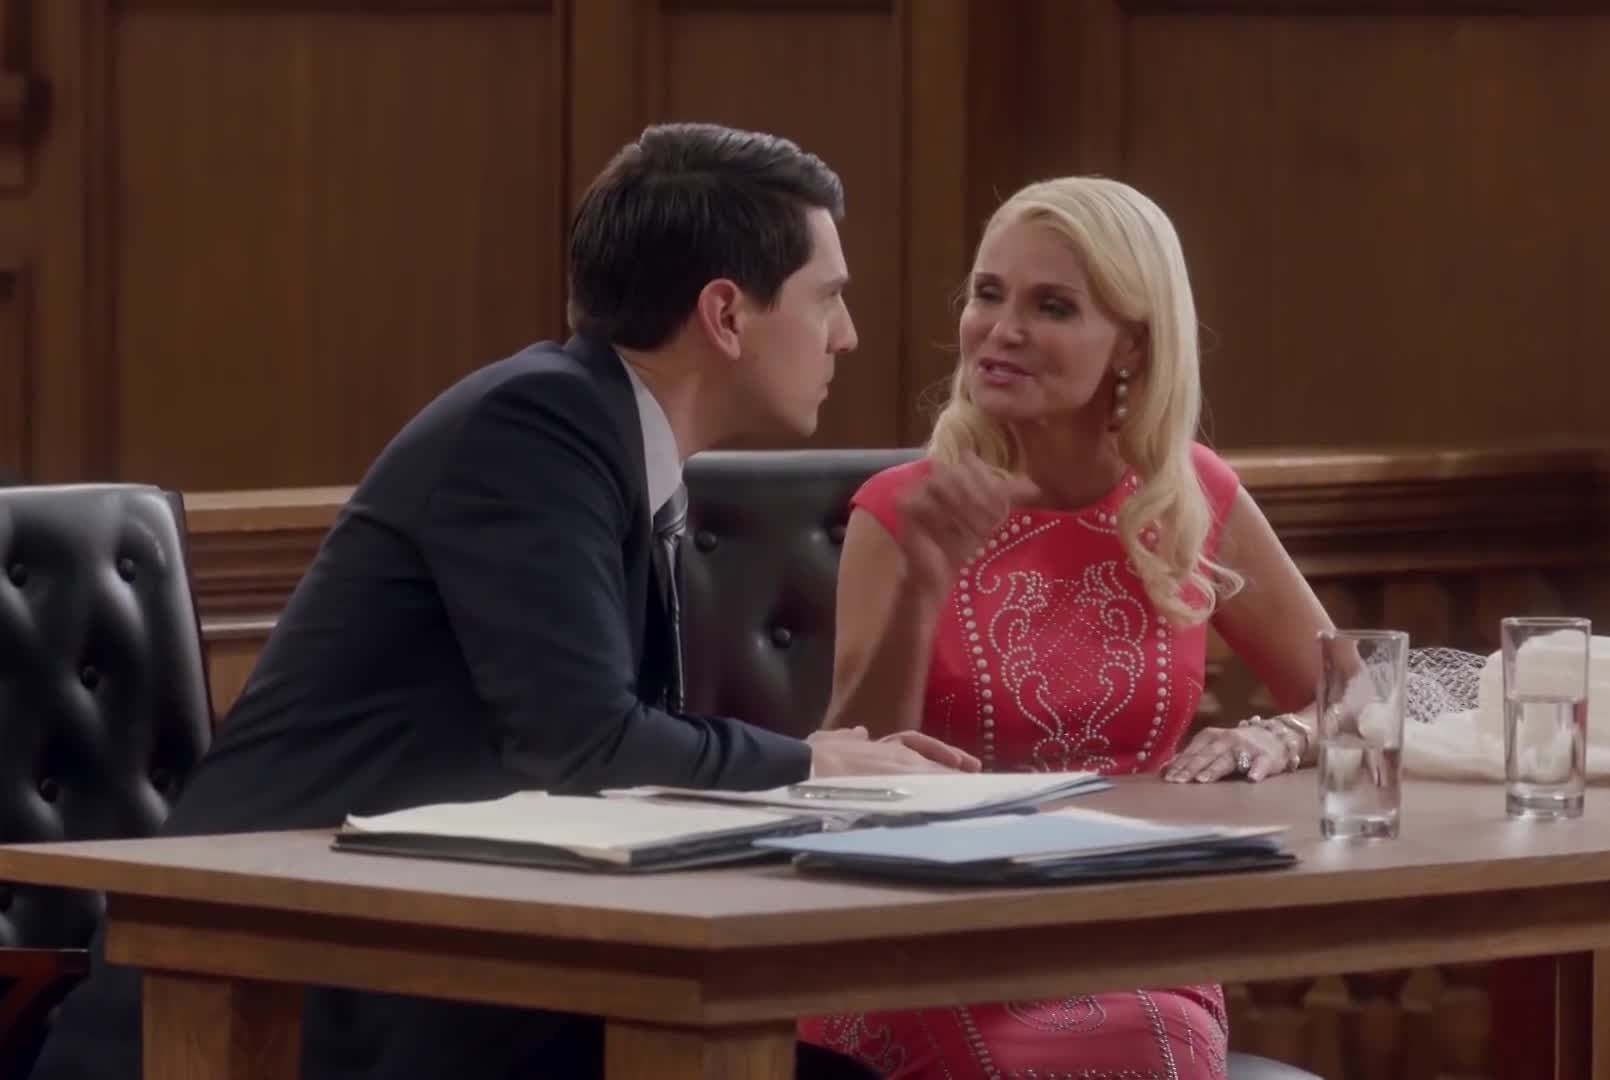 Lavinia and Josh chat during a court scene in &quot;Trial and Error&quot;